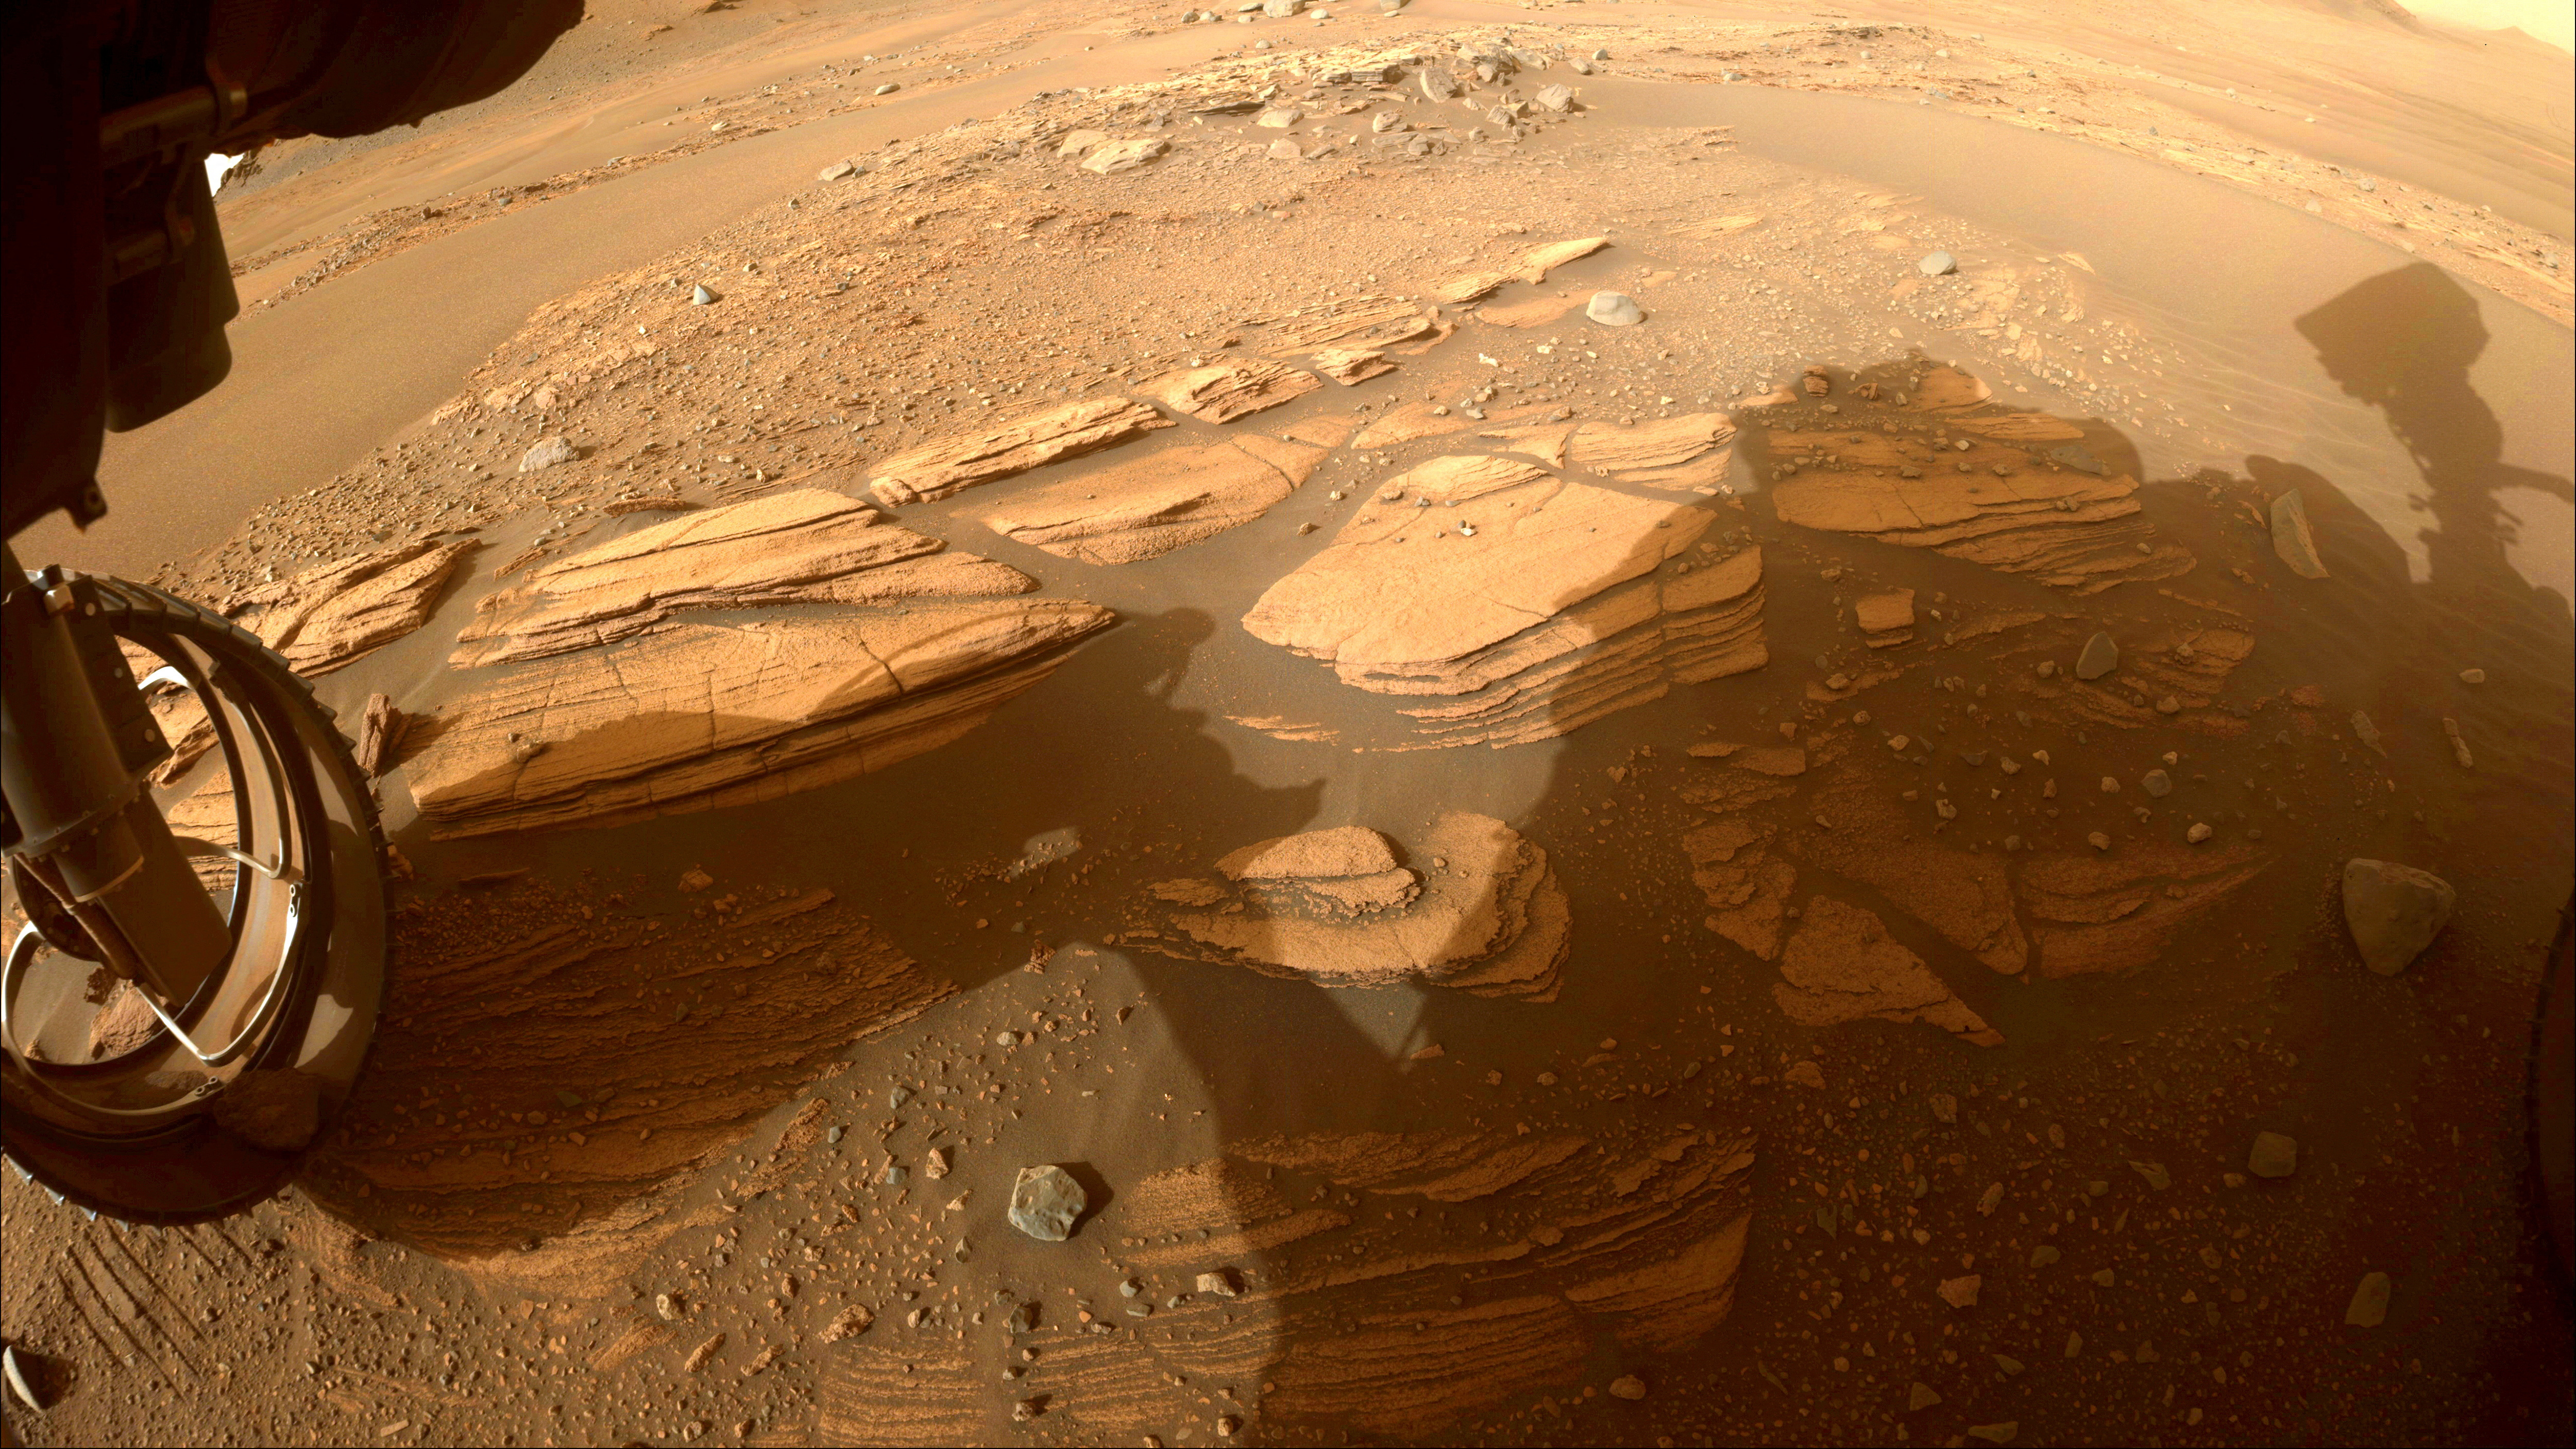 Perseverance has collected four samples of delta formation since early July.  (NASA/JPL-Caltech/published via REUTERS)